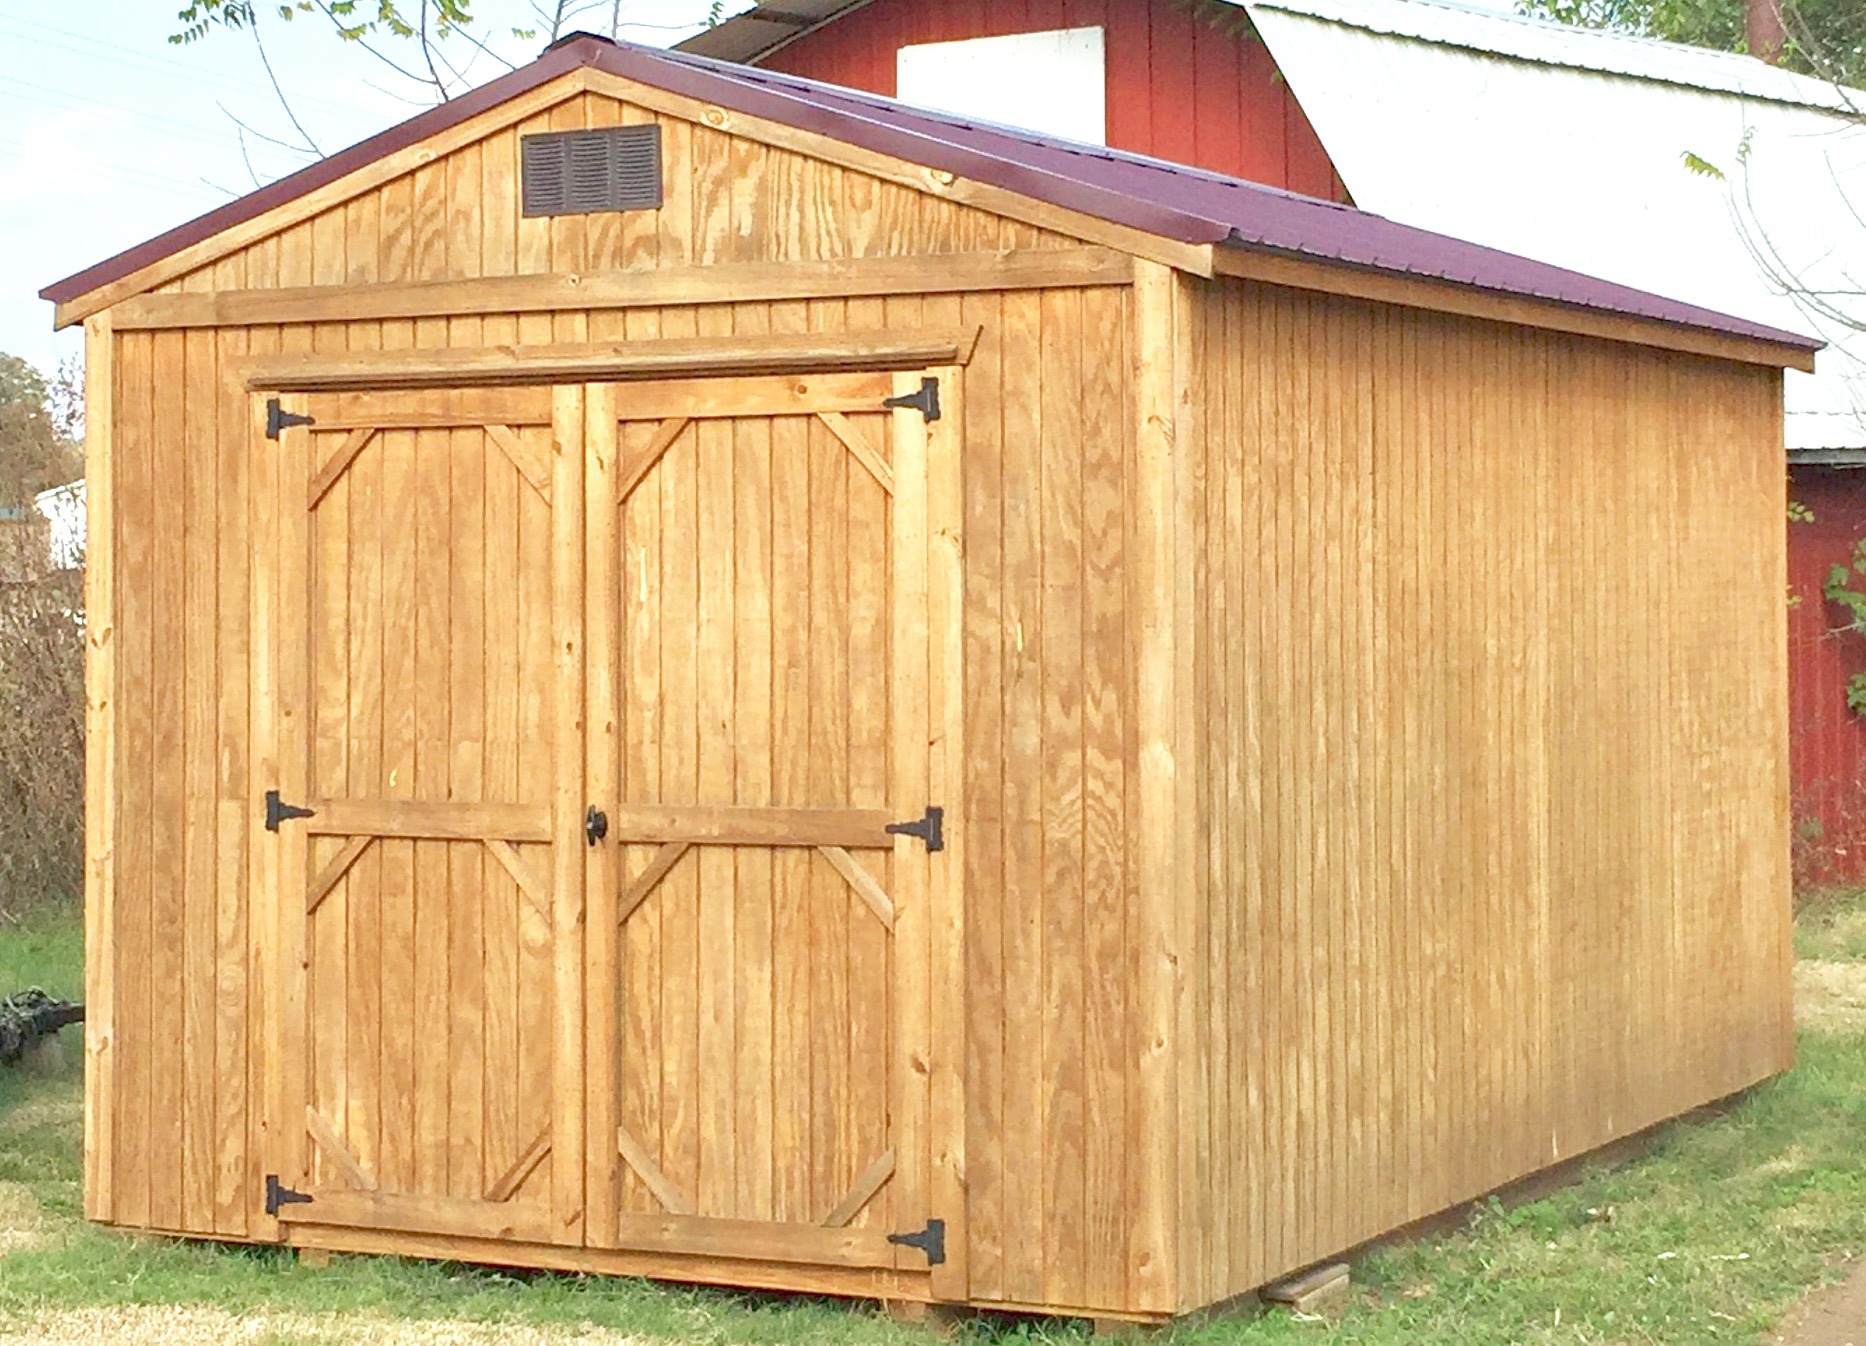 Light wood treated utility shed with burgundy metal roof